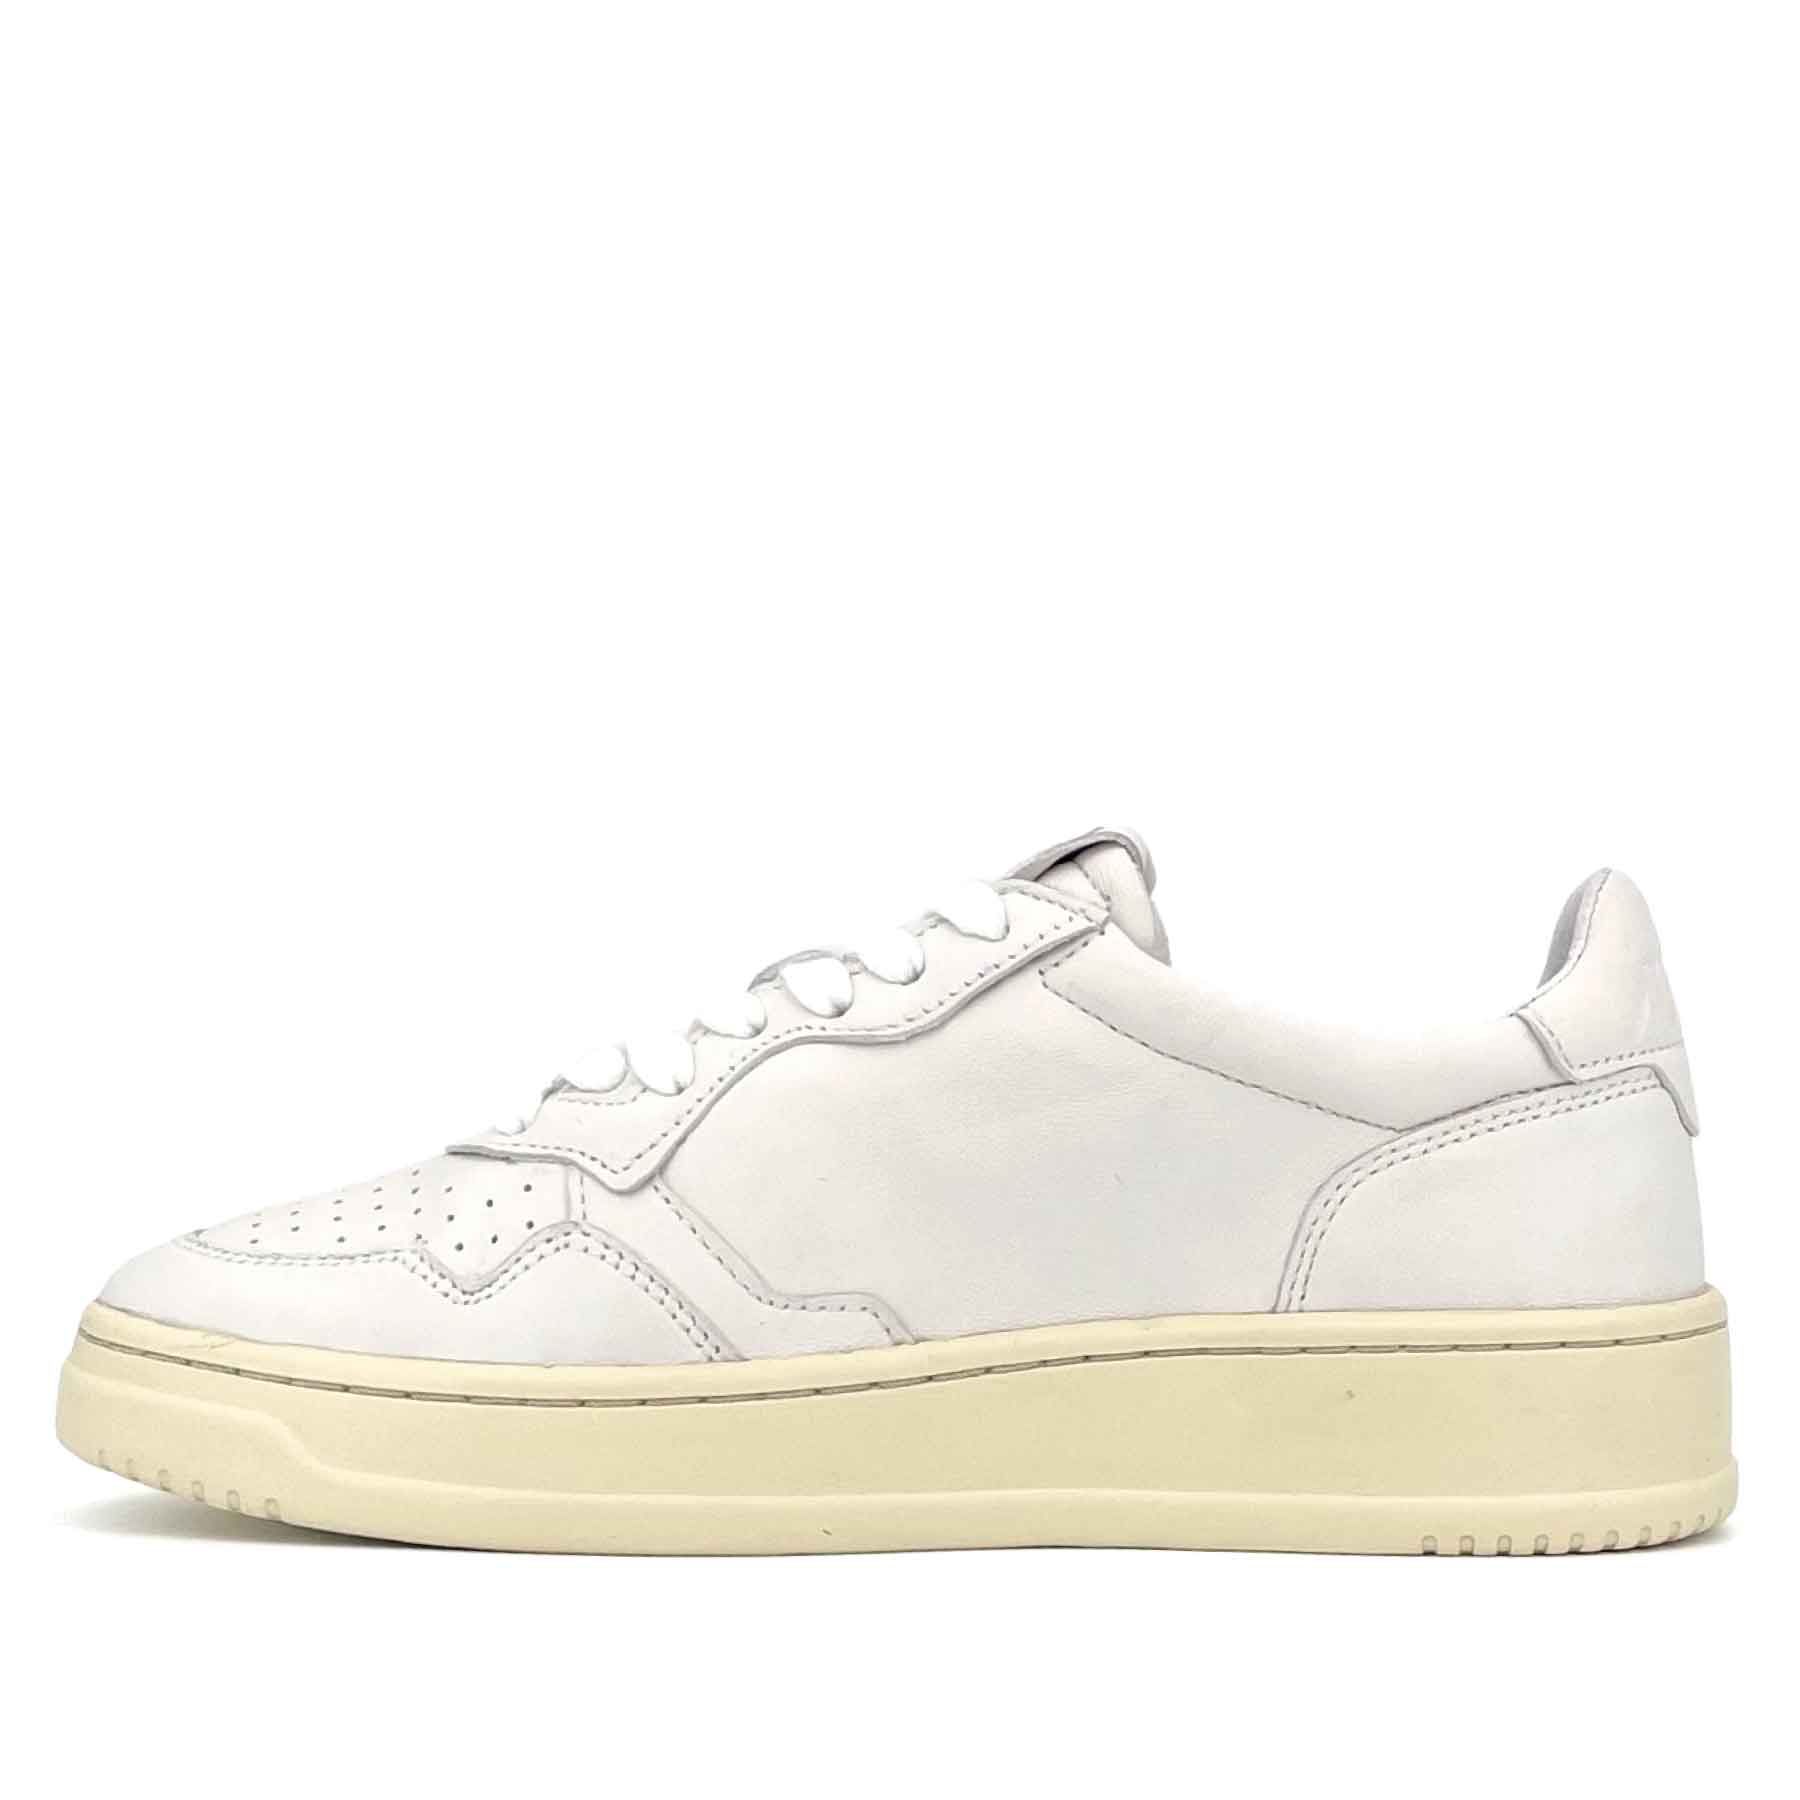 01 Medalist Low Man Goat Leather White